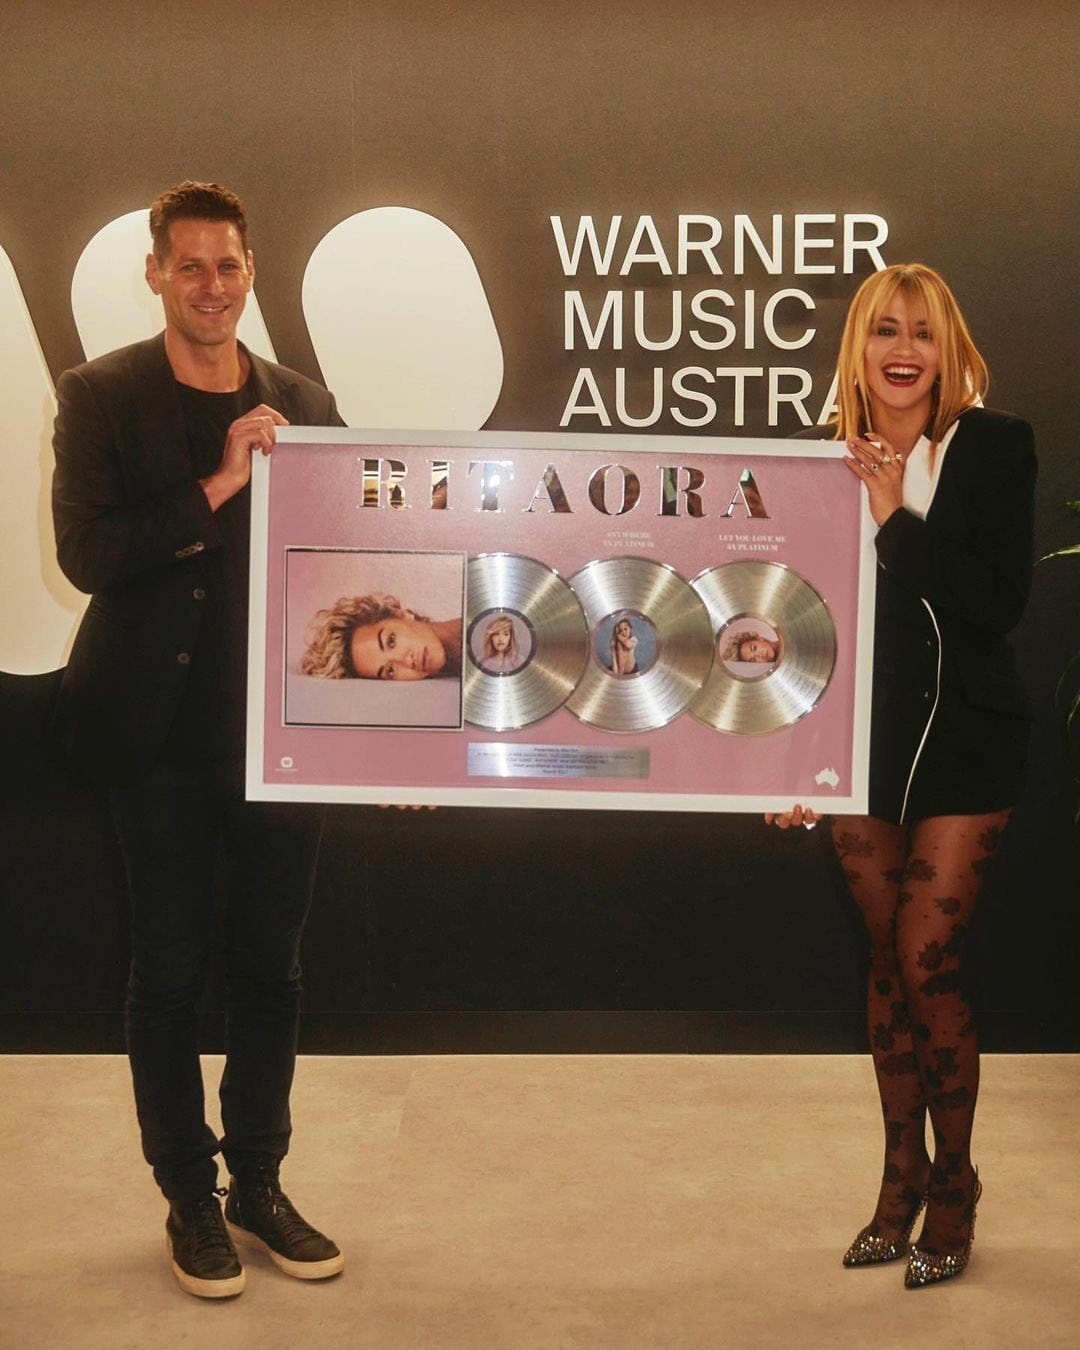 Rita Ora was presented with a special plaque after her 2018 album Phoenix received multi-Platinum certification in Australia in 2021